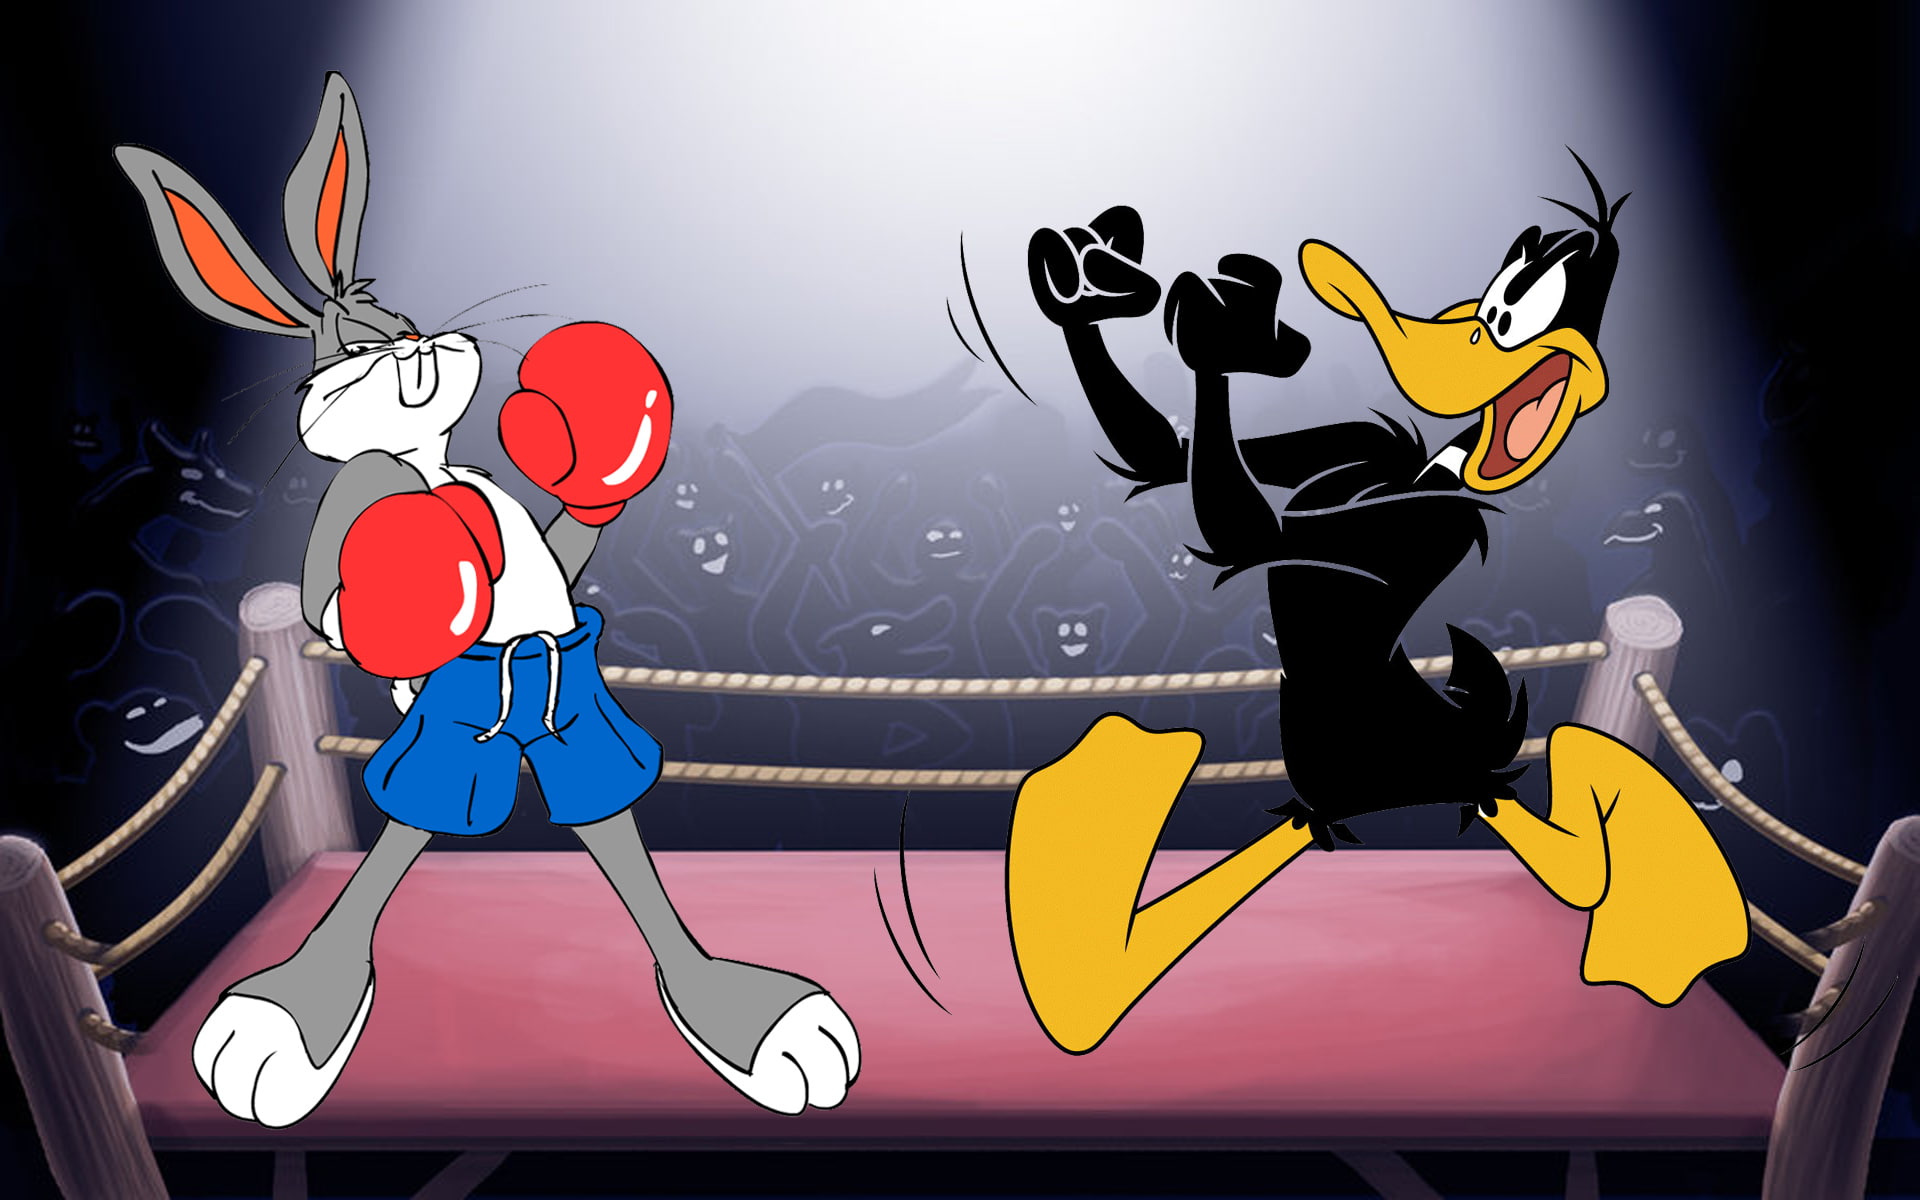 Looney Tunes Boxer Bugs Bunny And Daffy Duck Cartoon Hd Desktop Backgrounds Free Download 1920×1200